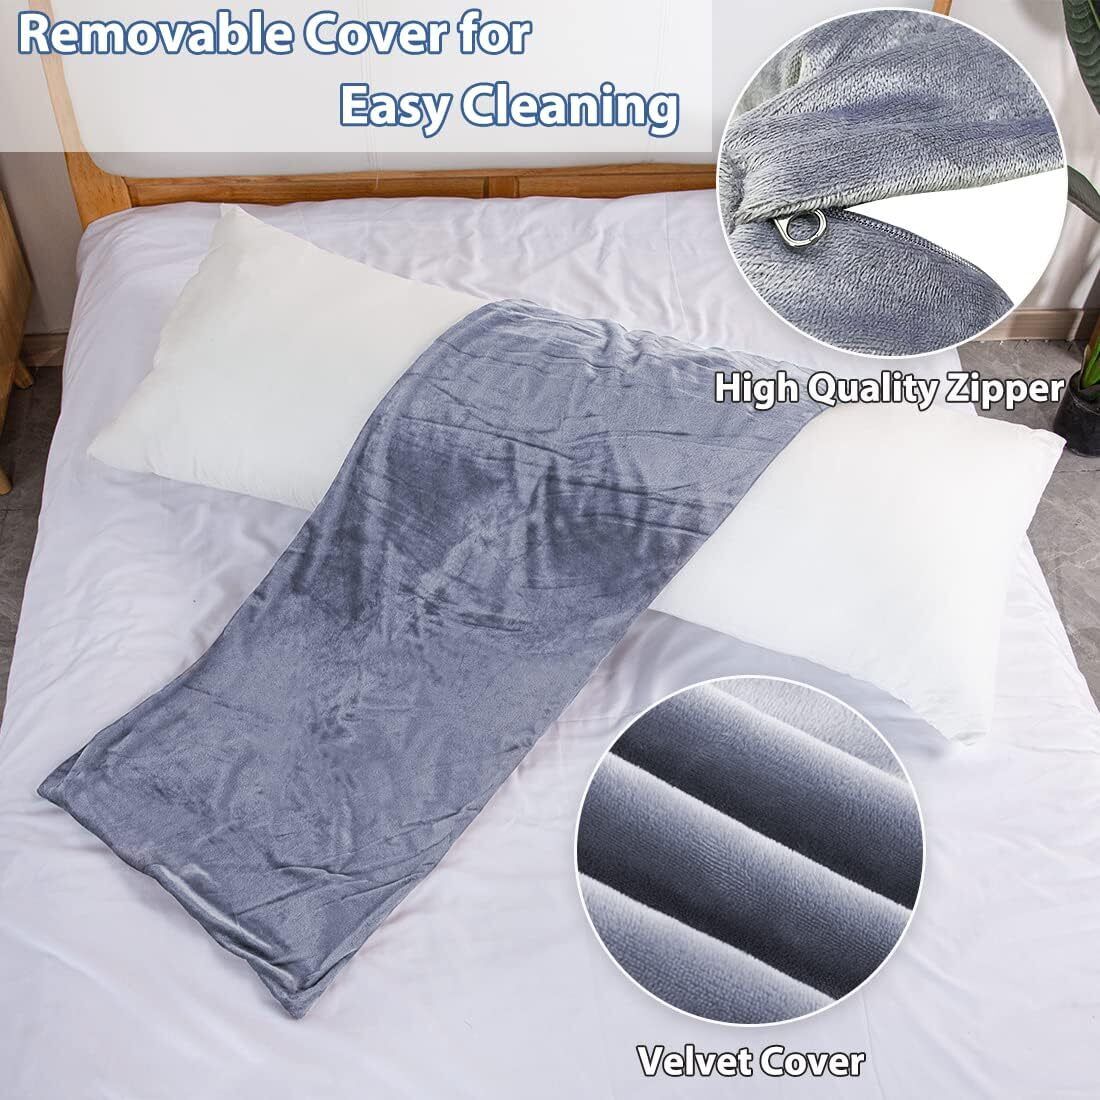 Full Body Pillow for Adults, Long Sleeping, Big Pillows Bed, Large, Dark Grey  1 MIDDLE ONE MO-BP-DG - фотография #4